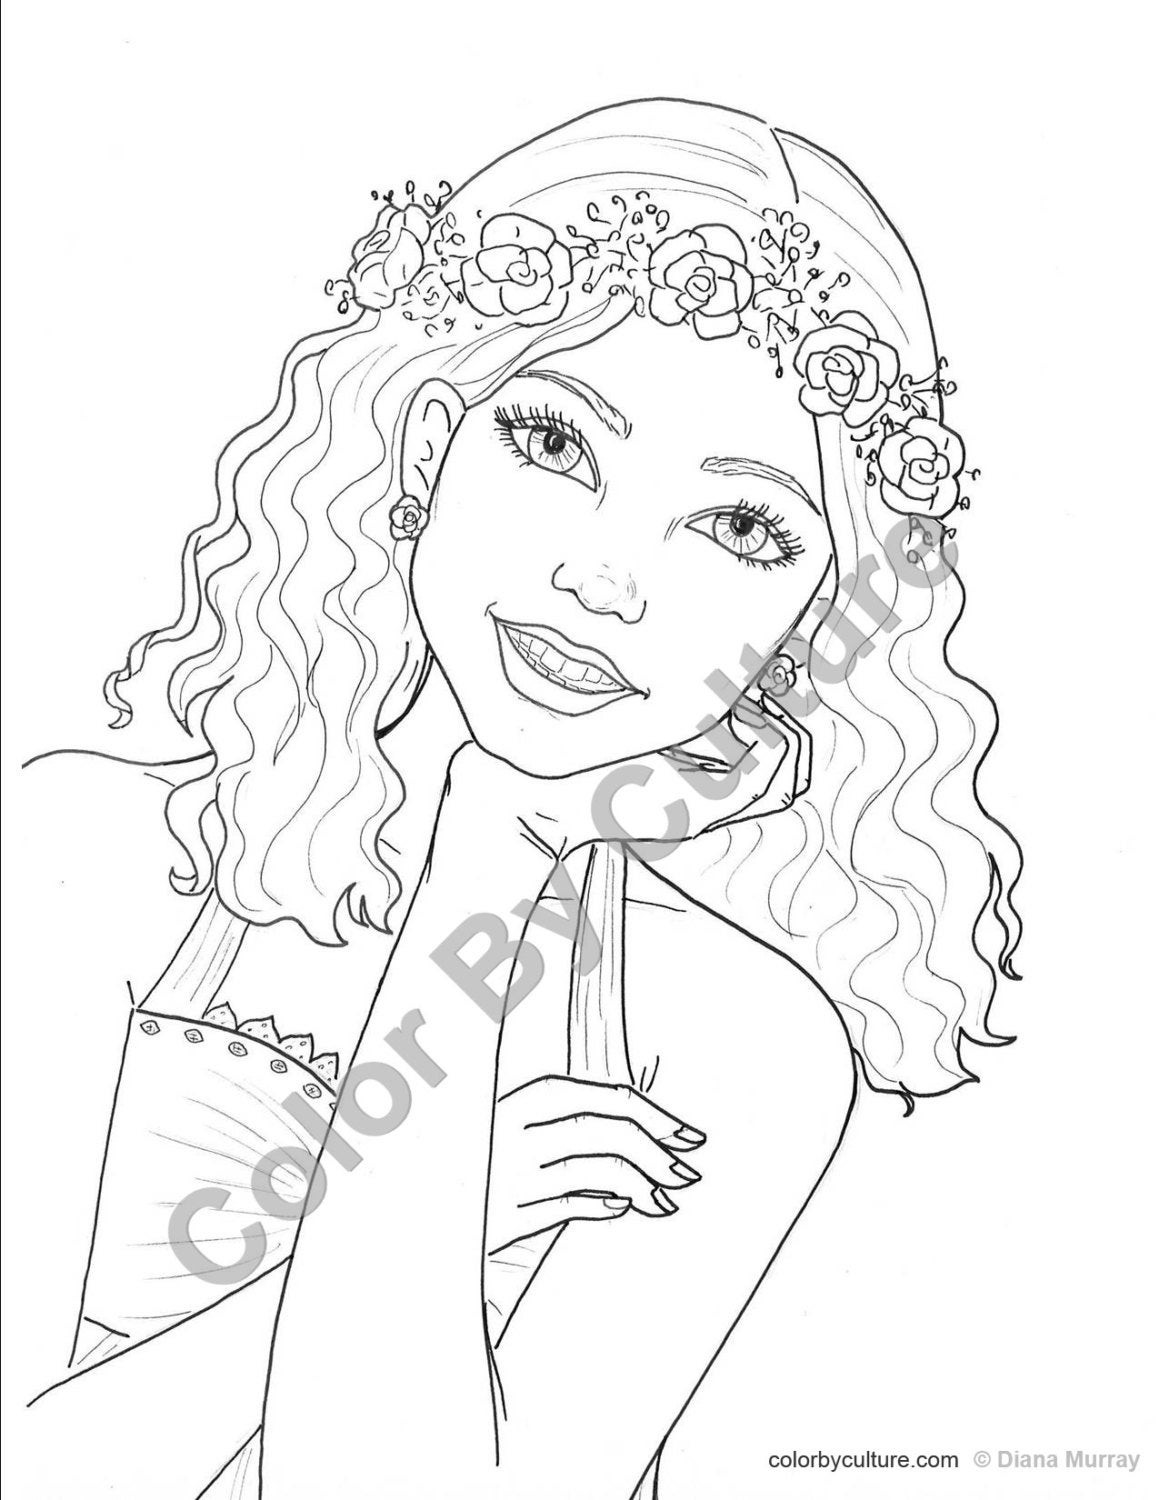 Flower Girl Coloring Pages
 Fashion Coloring Page Girl with Flower Wreath Coloring Page